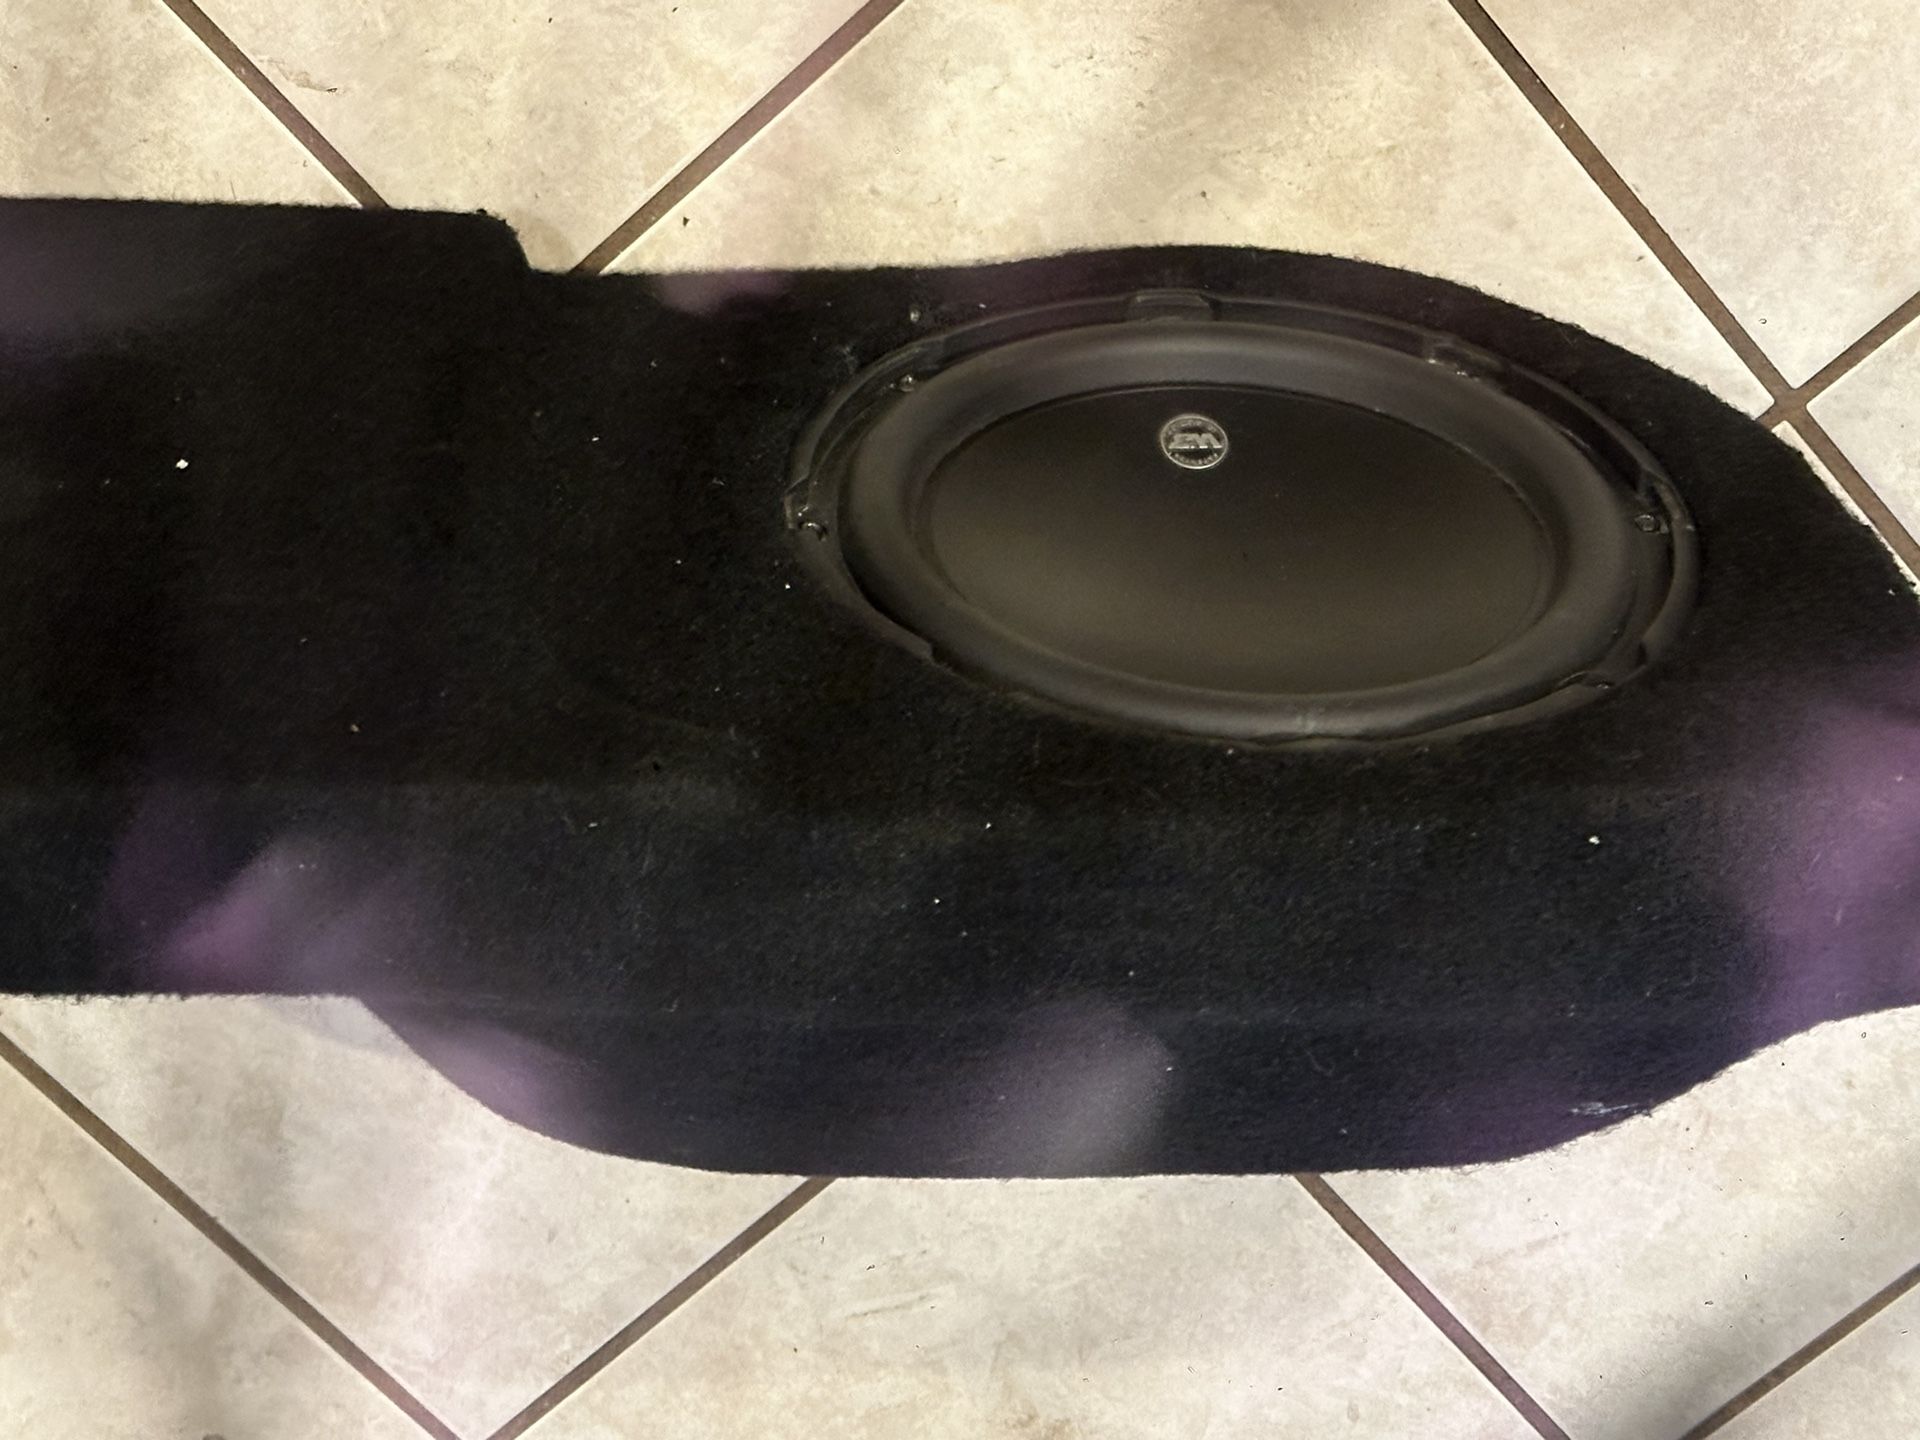 I Have A Like New Condition 10” W3 Sub Woofer In A Dodge Ram Under Rear Seat Set Up 